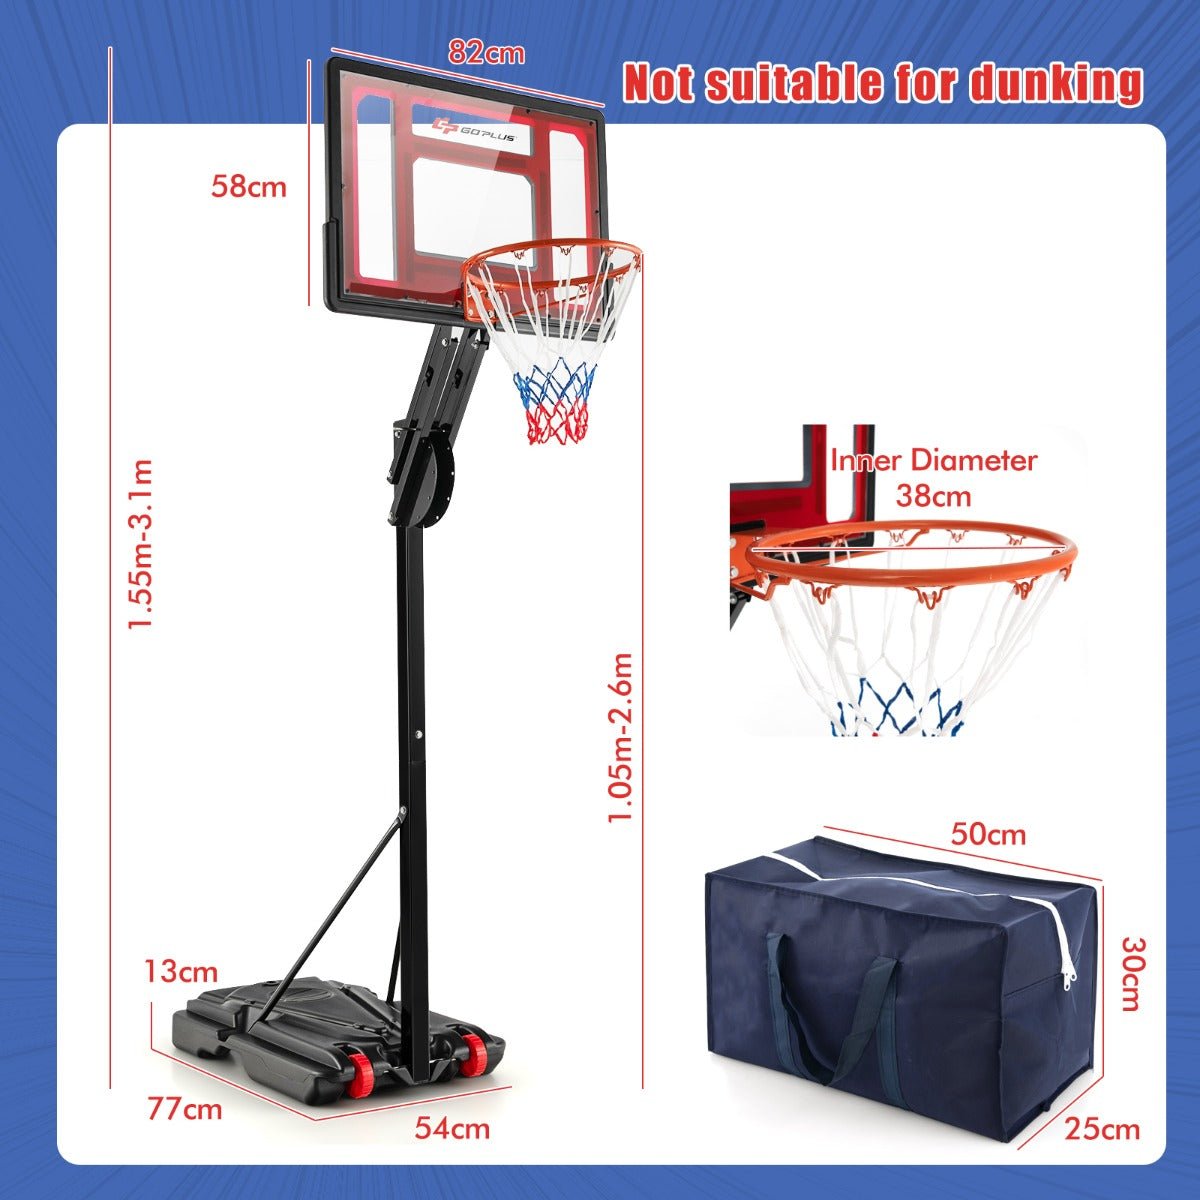 Elevate Your Basketball Game - Buy Yours Now!